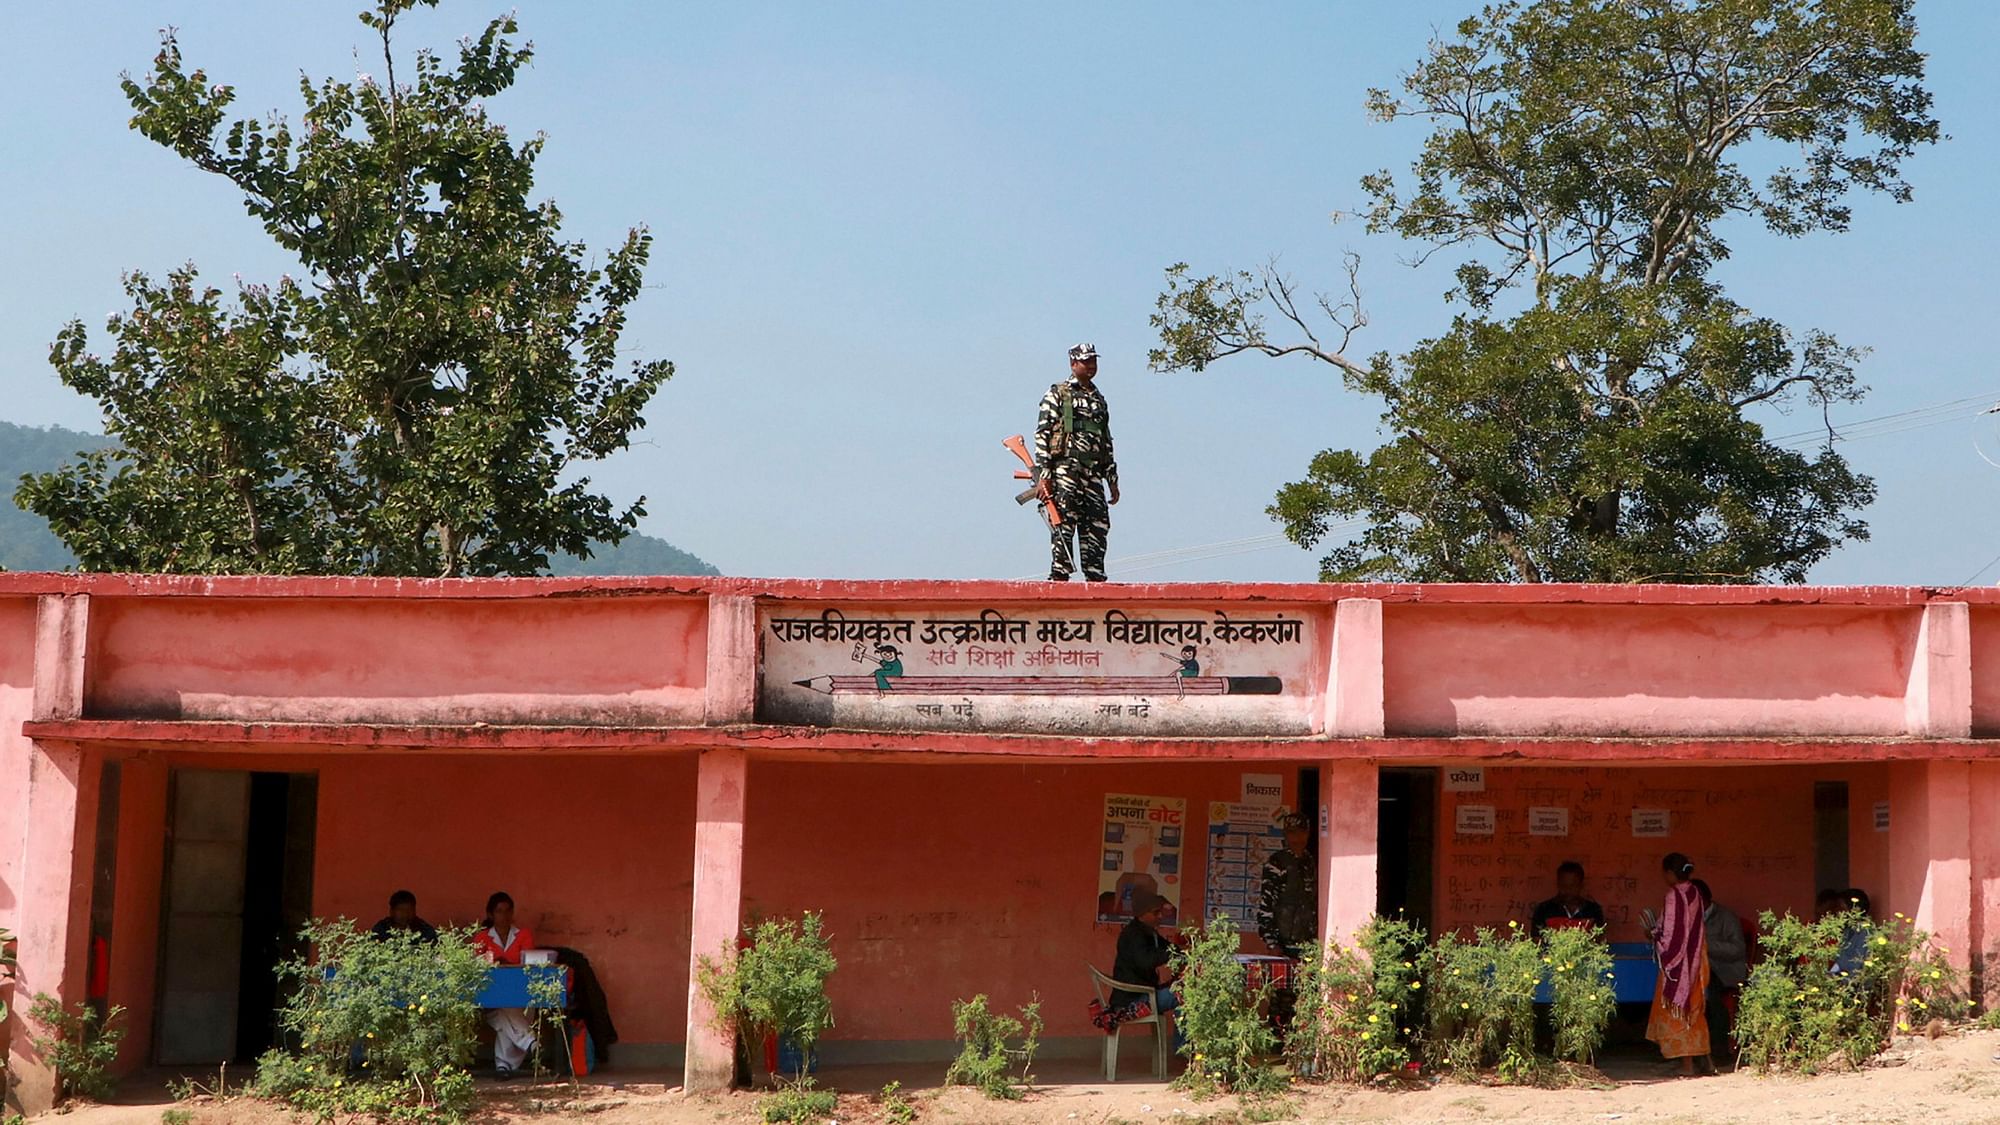 A security personnel on election duty in Jharkhand. Image used for representation.